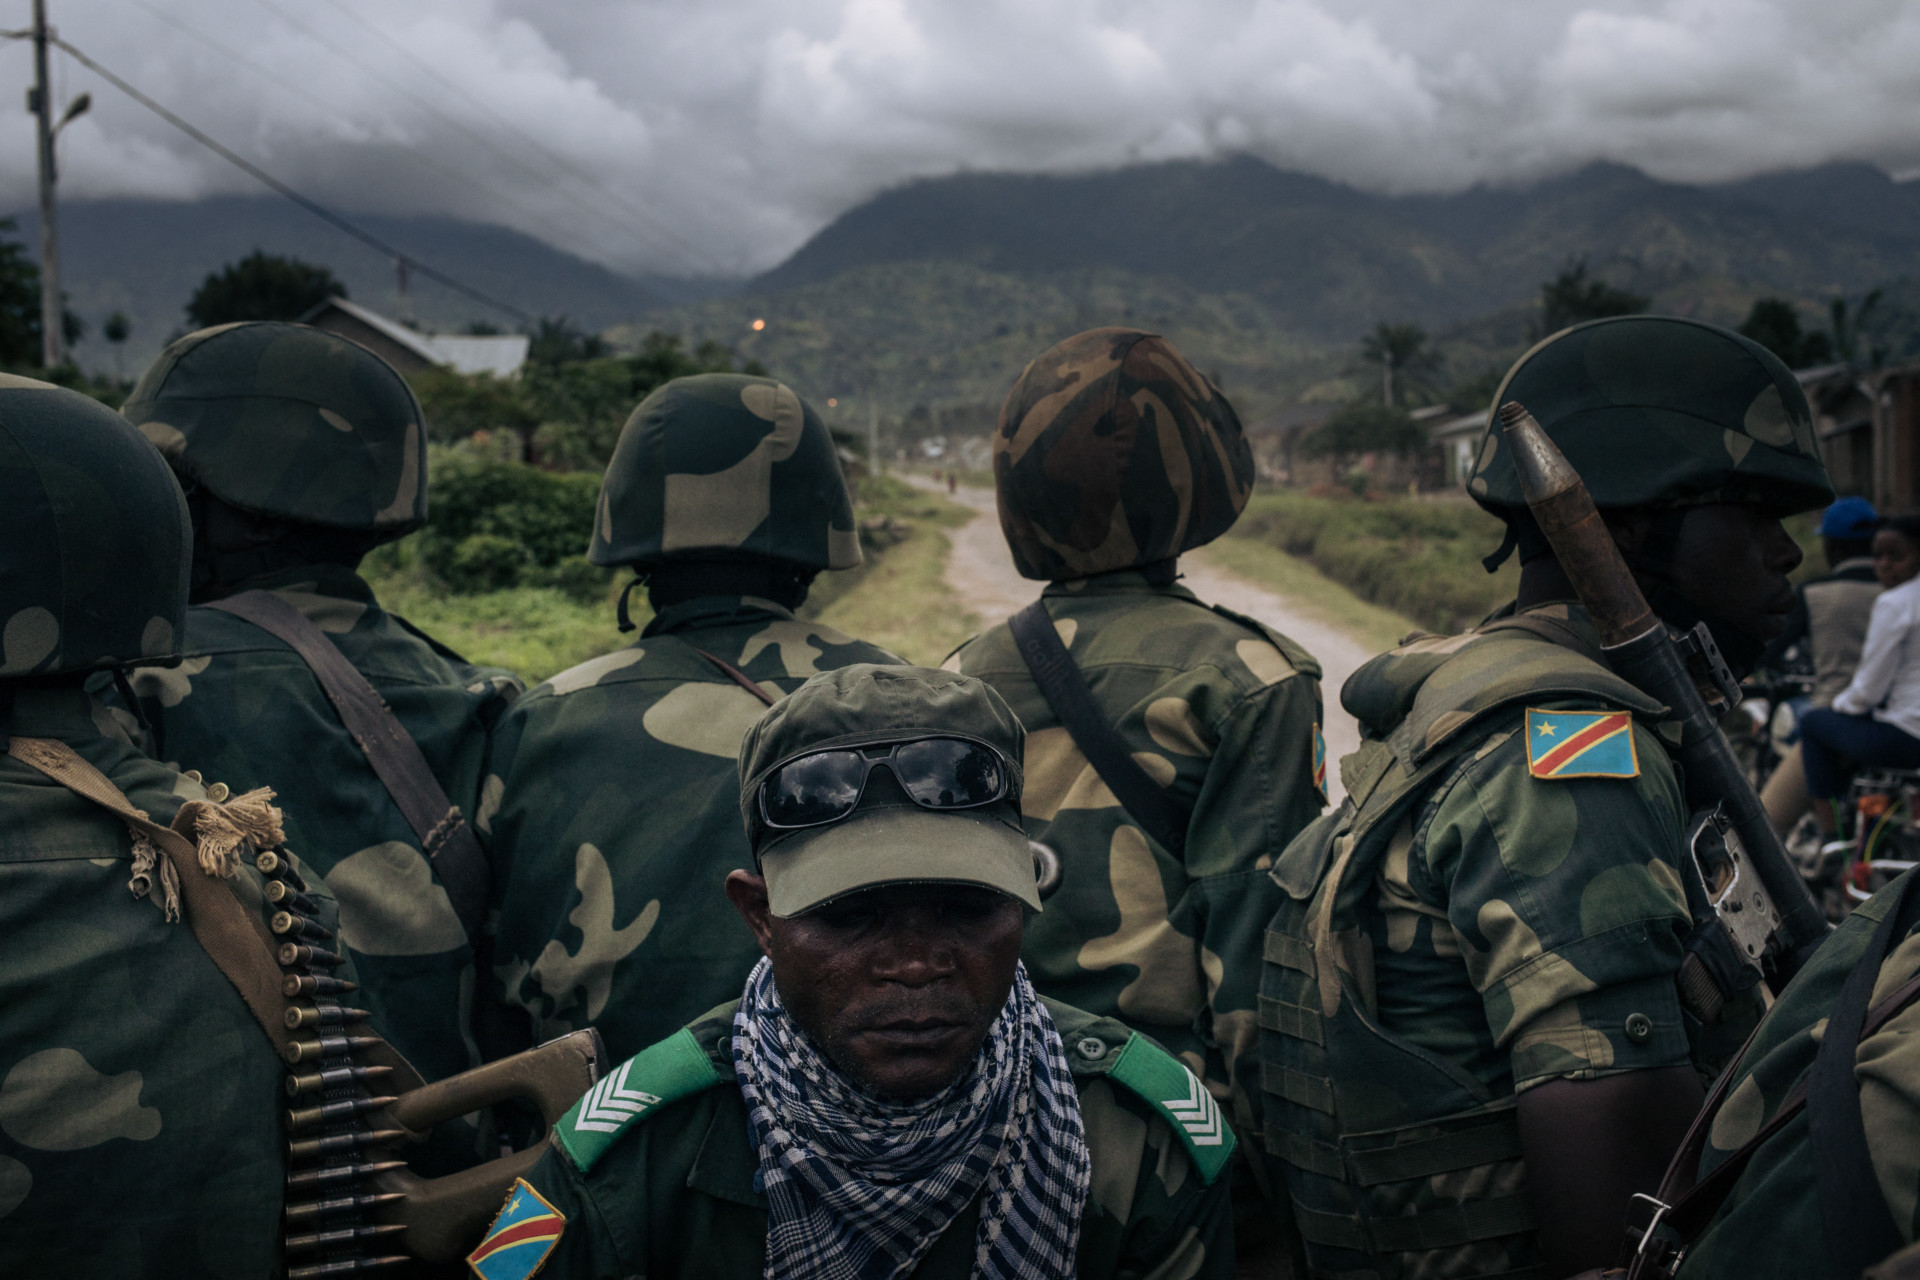 Neither Local, Nor Transnational, But Both: The Islamic State in Congo